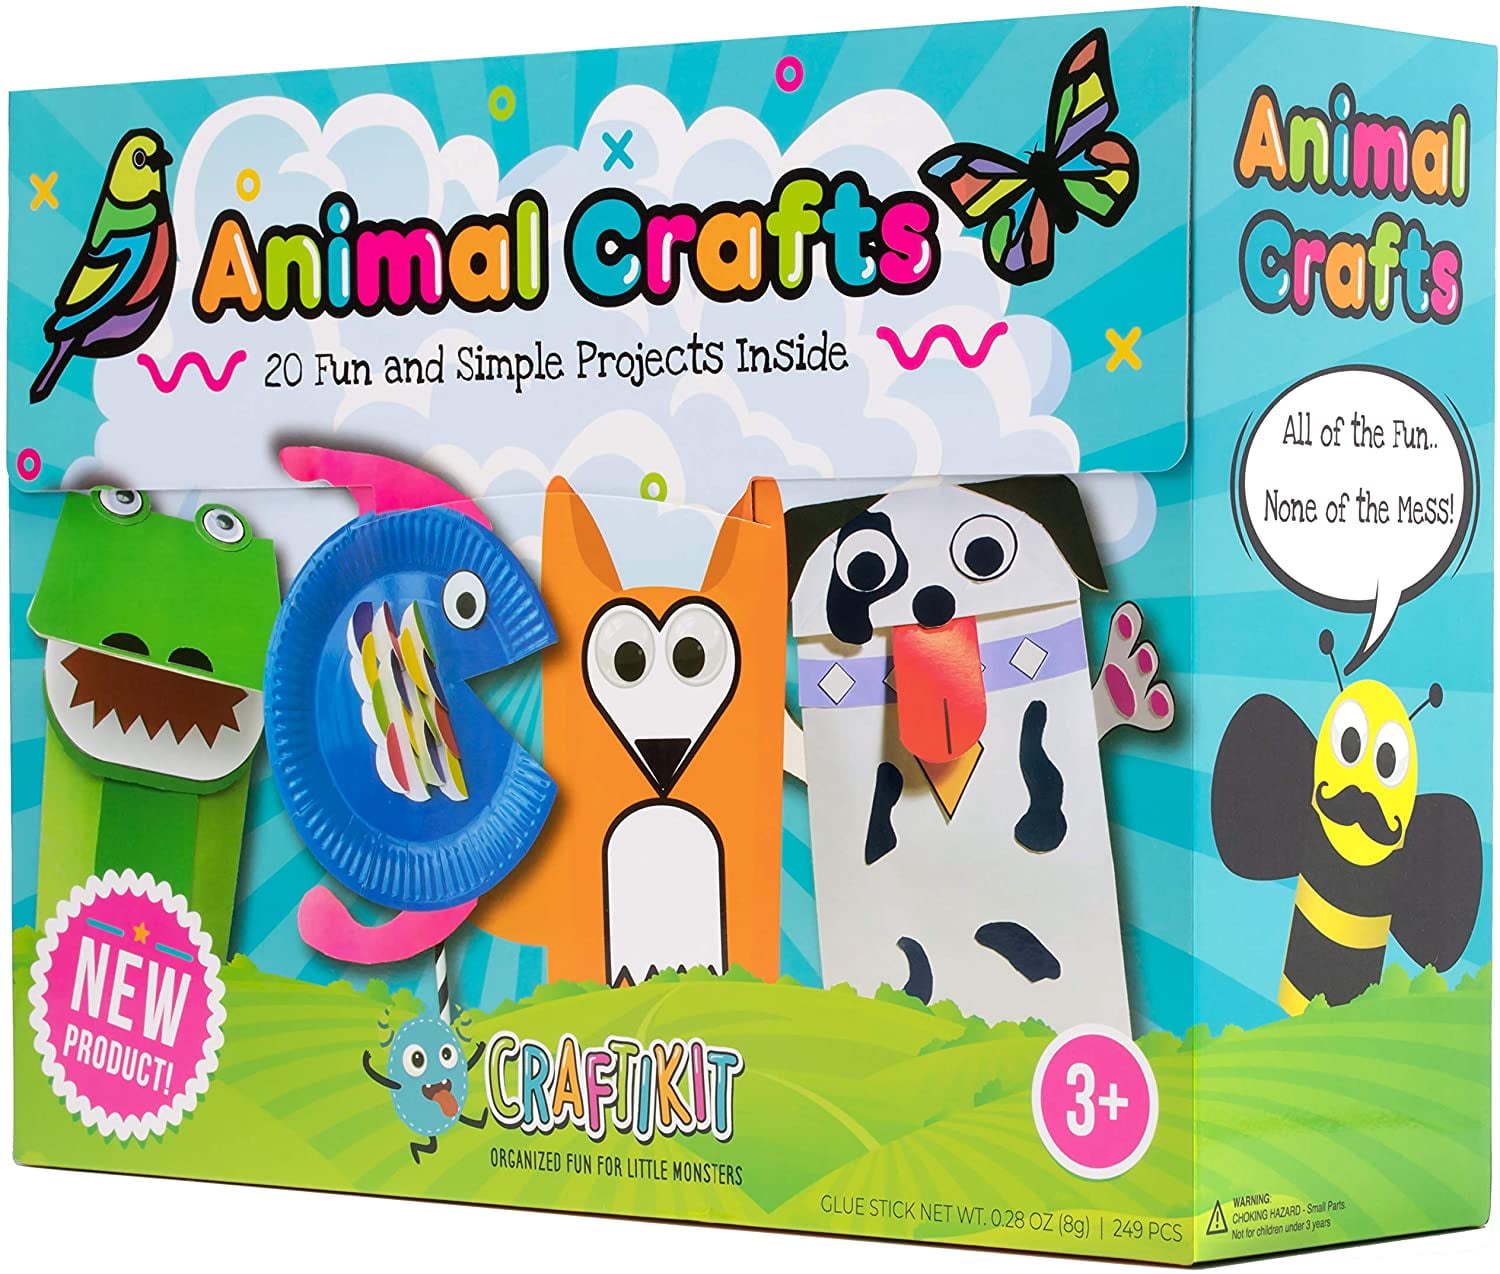 Lc crafts Art and crafts Kit for Kids Ages 8-12, create and Display  Animals, Kit Includes Supplies & Instruction, Best craft Project for K